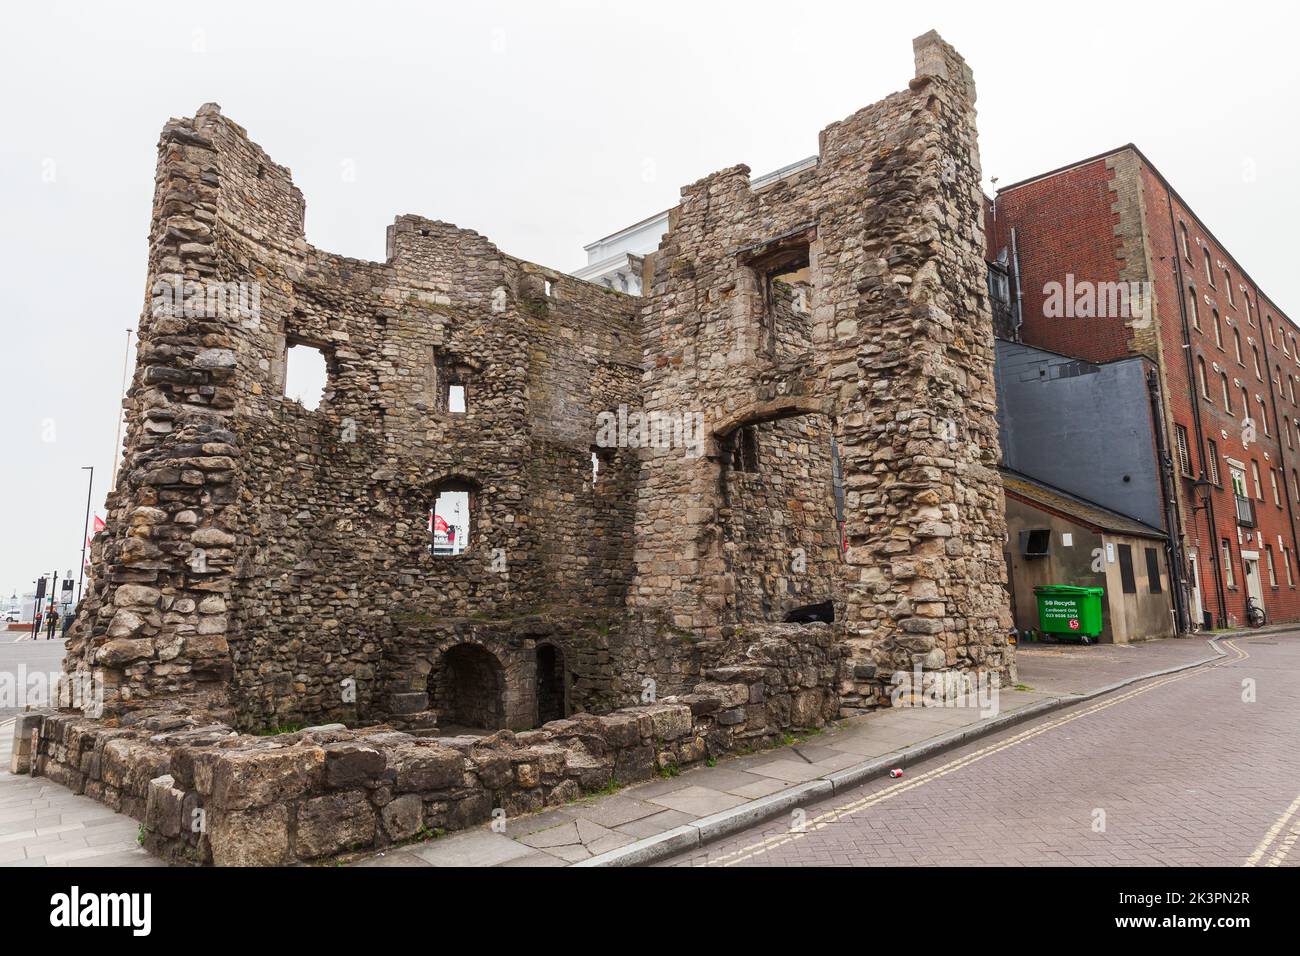 Southampton, United Kingdom - April 23, 2019: Ruined stone tower, part of the Southampton town walls, it is a sequence of defensive structures built a Stock Photo